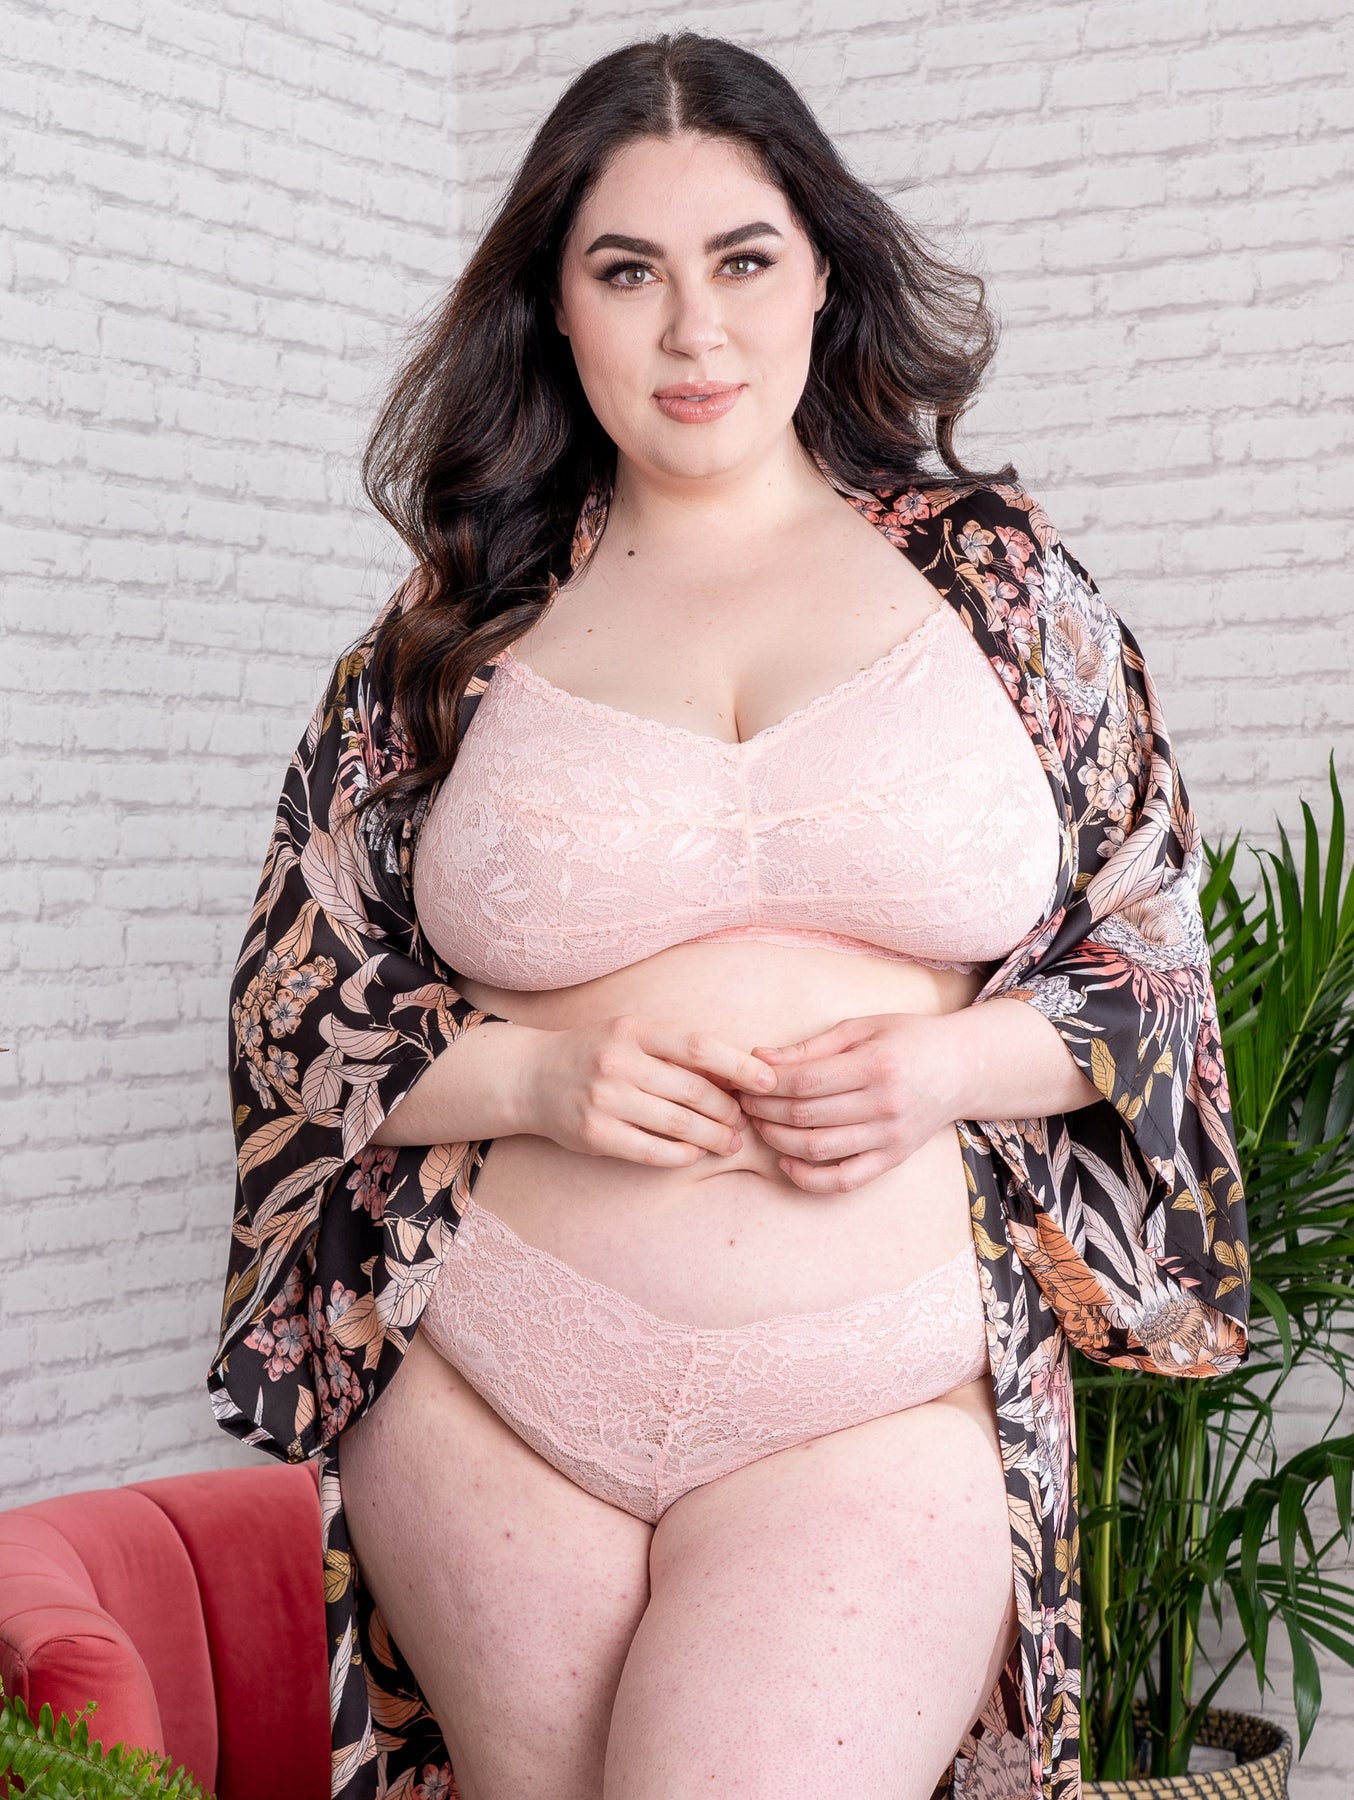 Cosabella, Never Say Never Curvy Sweetie Bralette